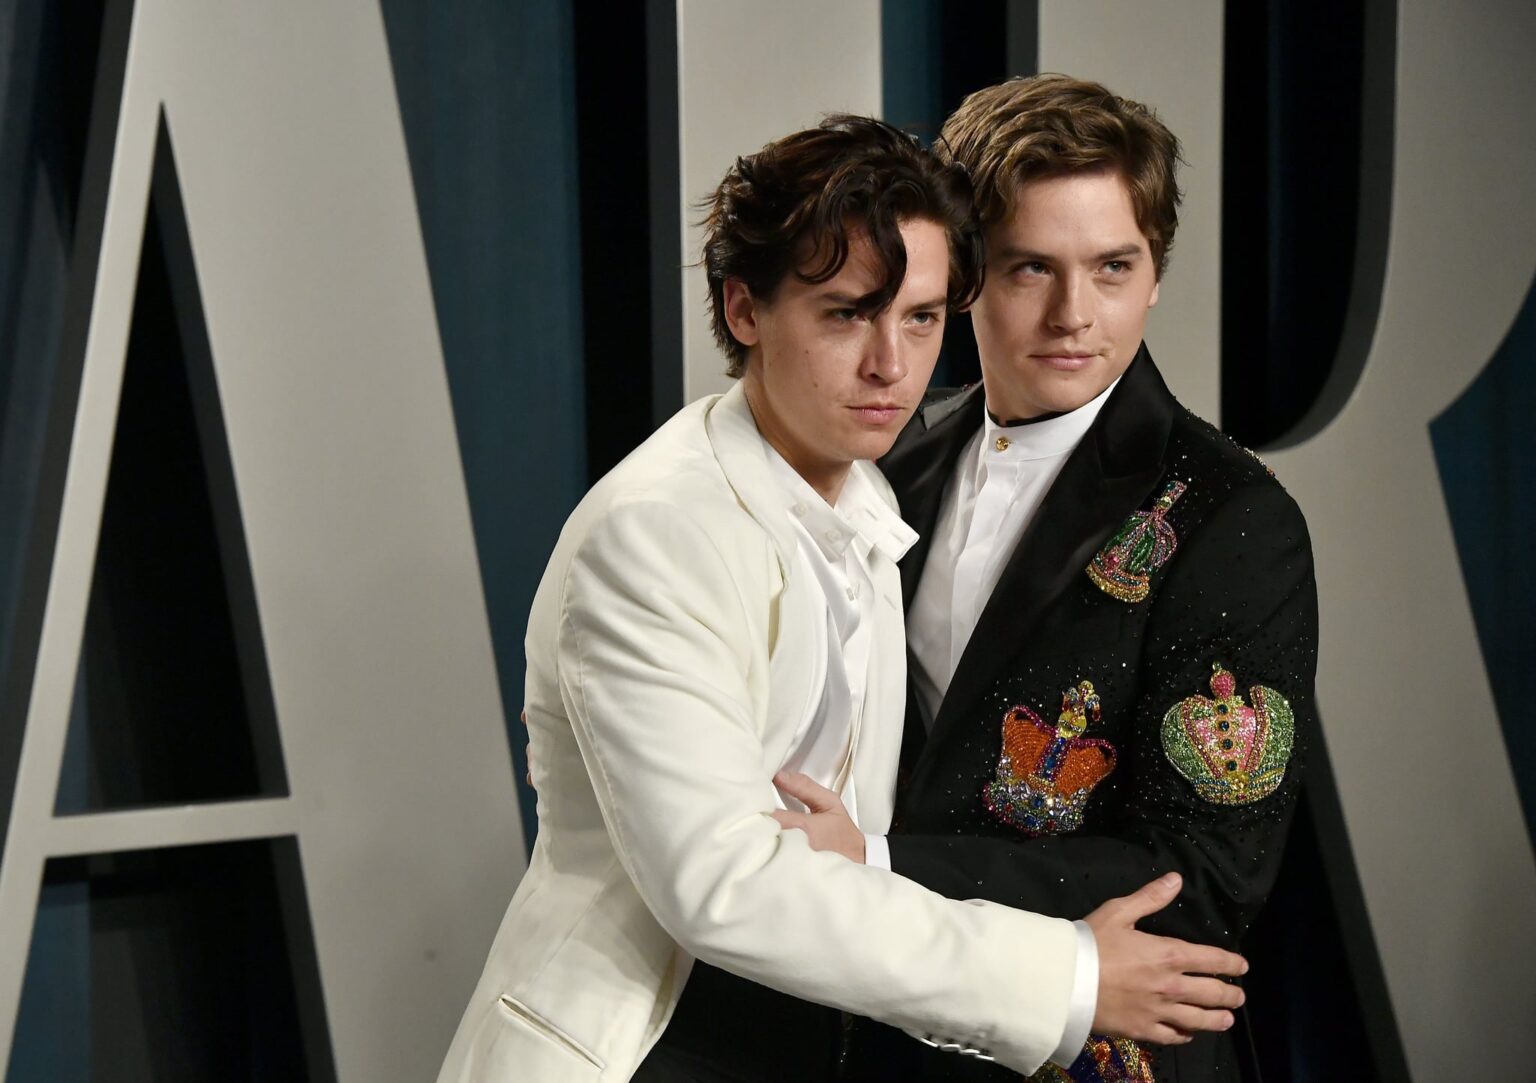 Anyone under the age of 30 likely remembers the Disney Channel years of twins Dylan and Cole Sprouse. But fans want to see Dylan join Cole on 'Riverdale'.